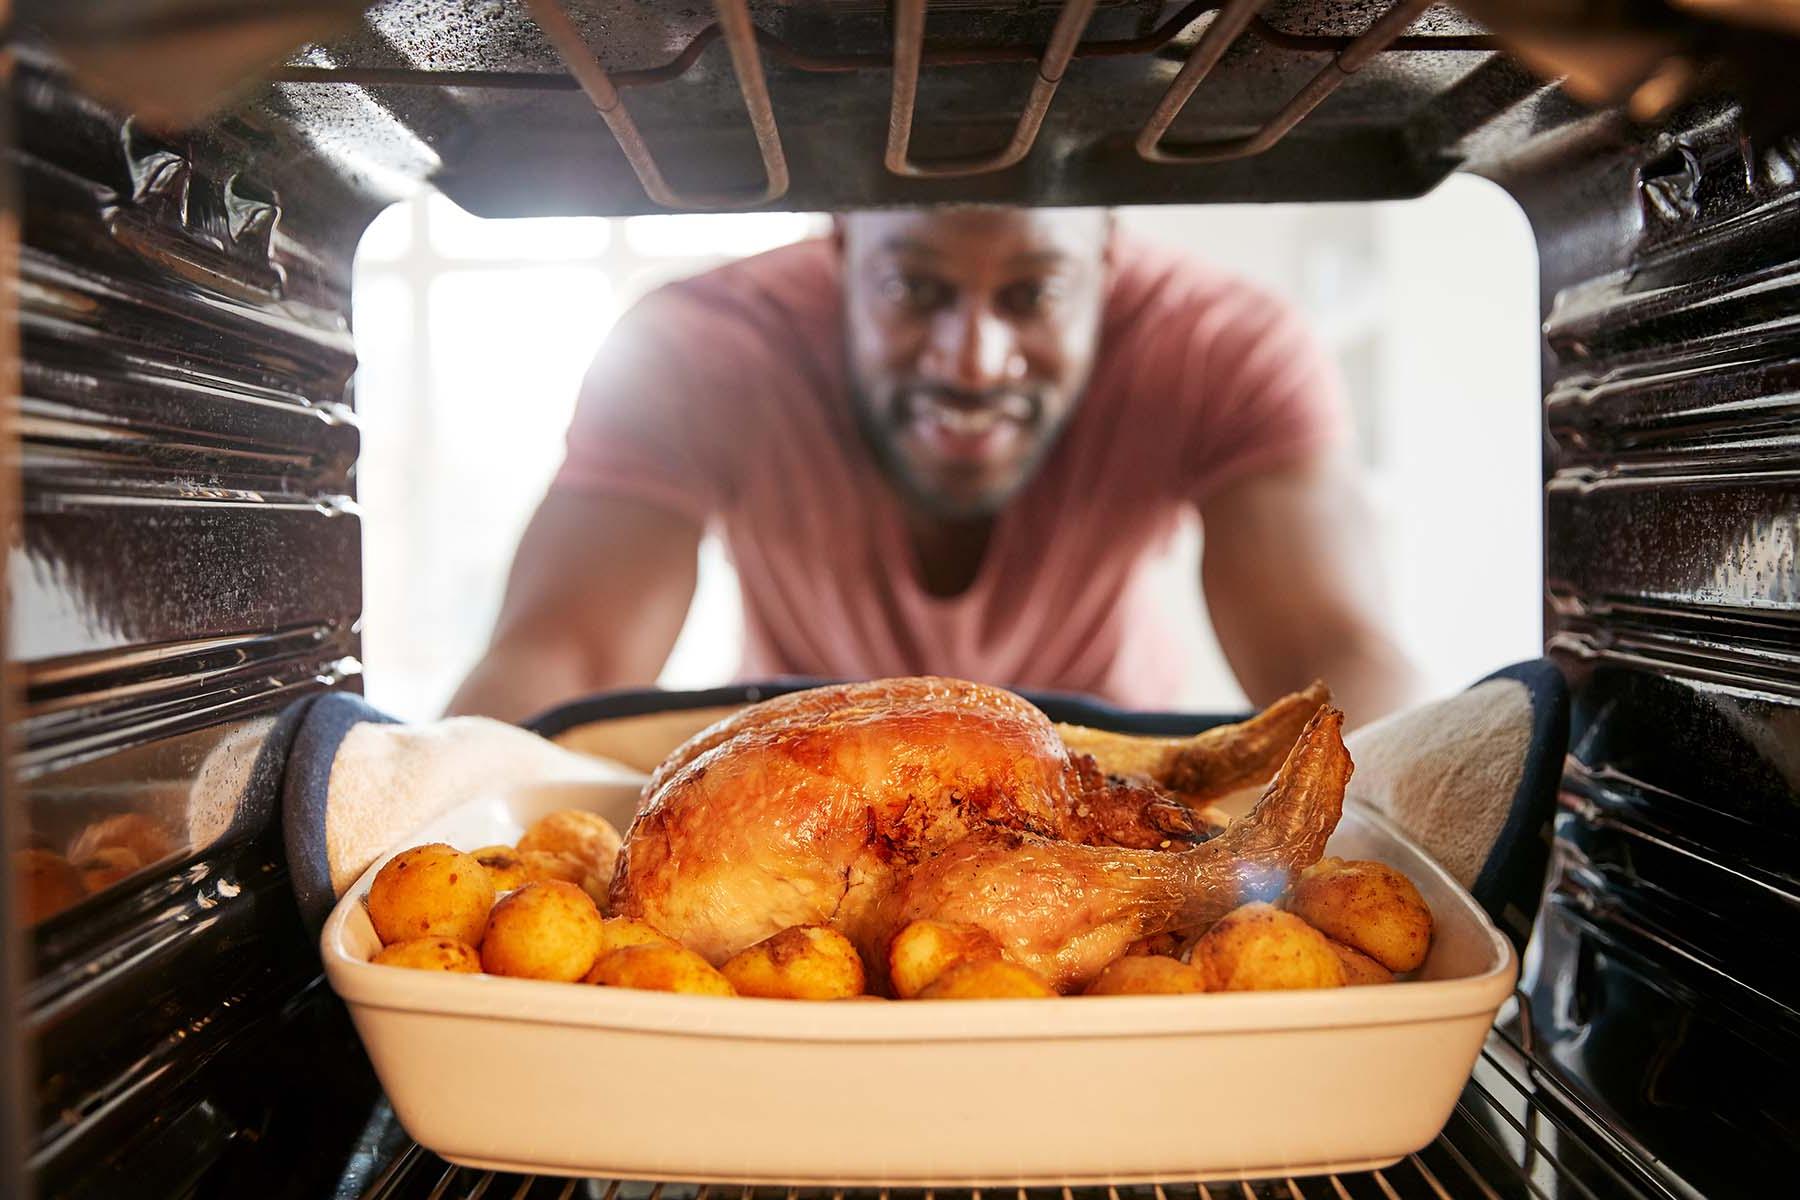 A man smiles as he takes a roasted chicken out of the oven